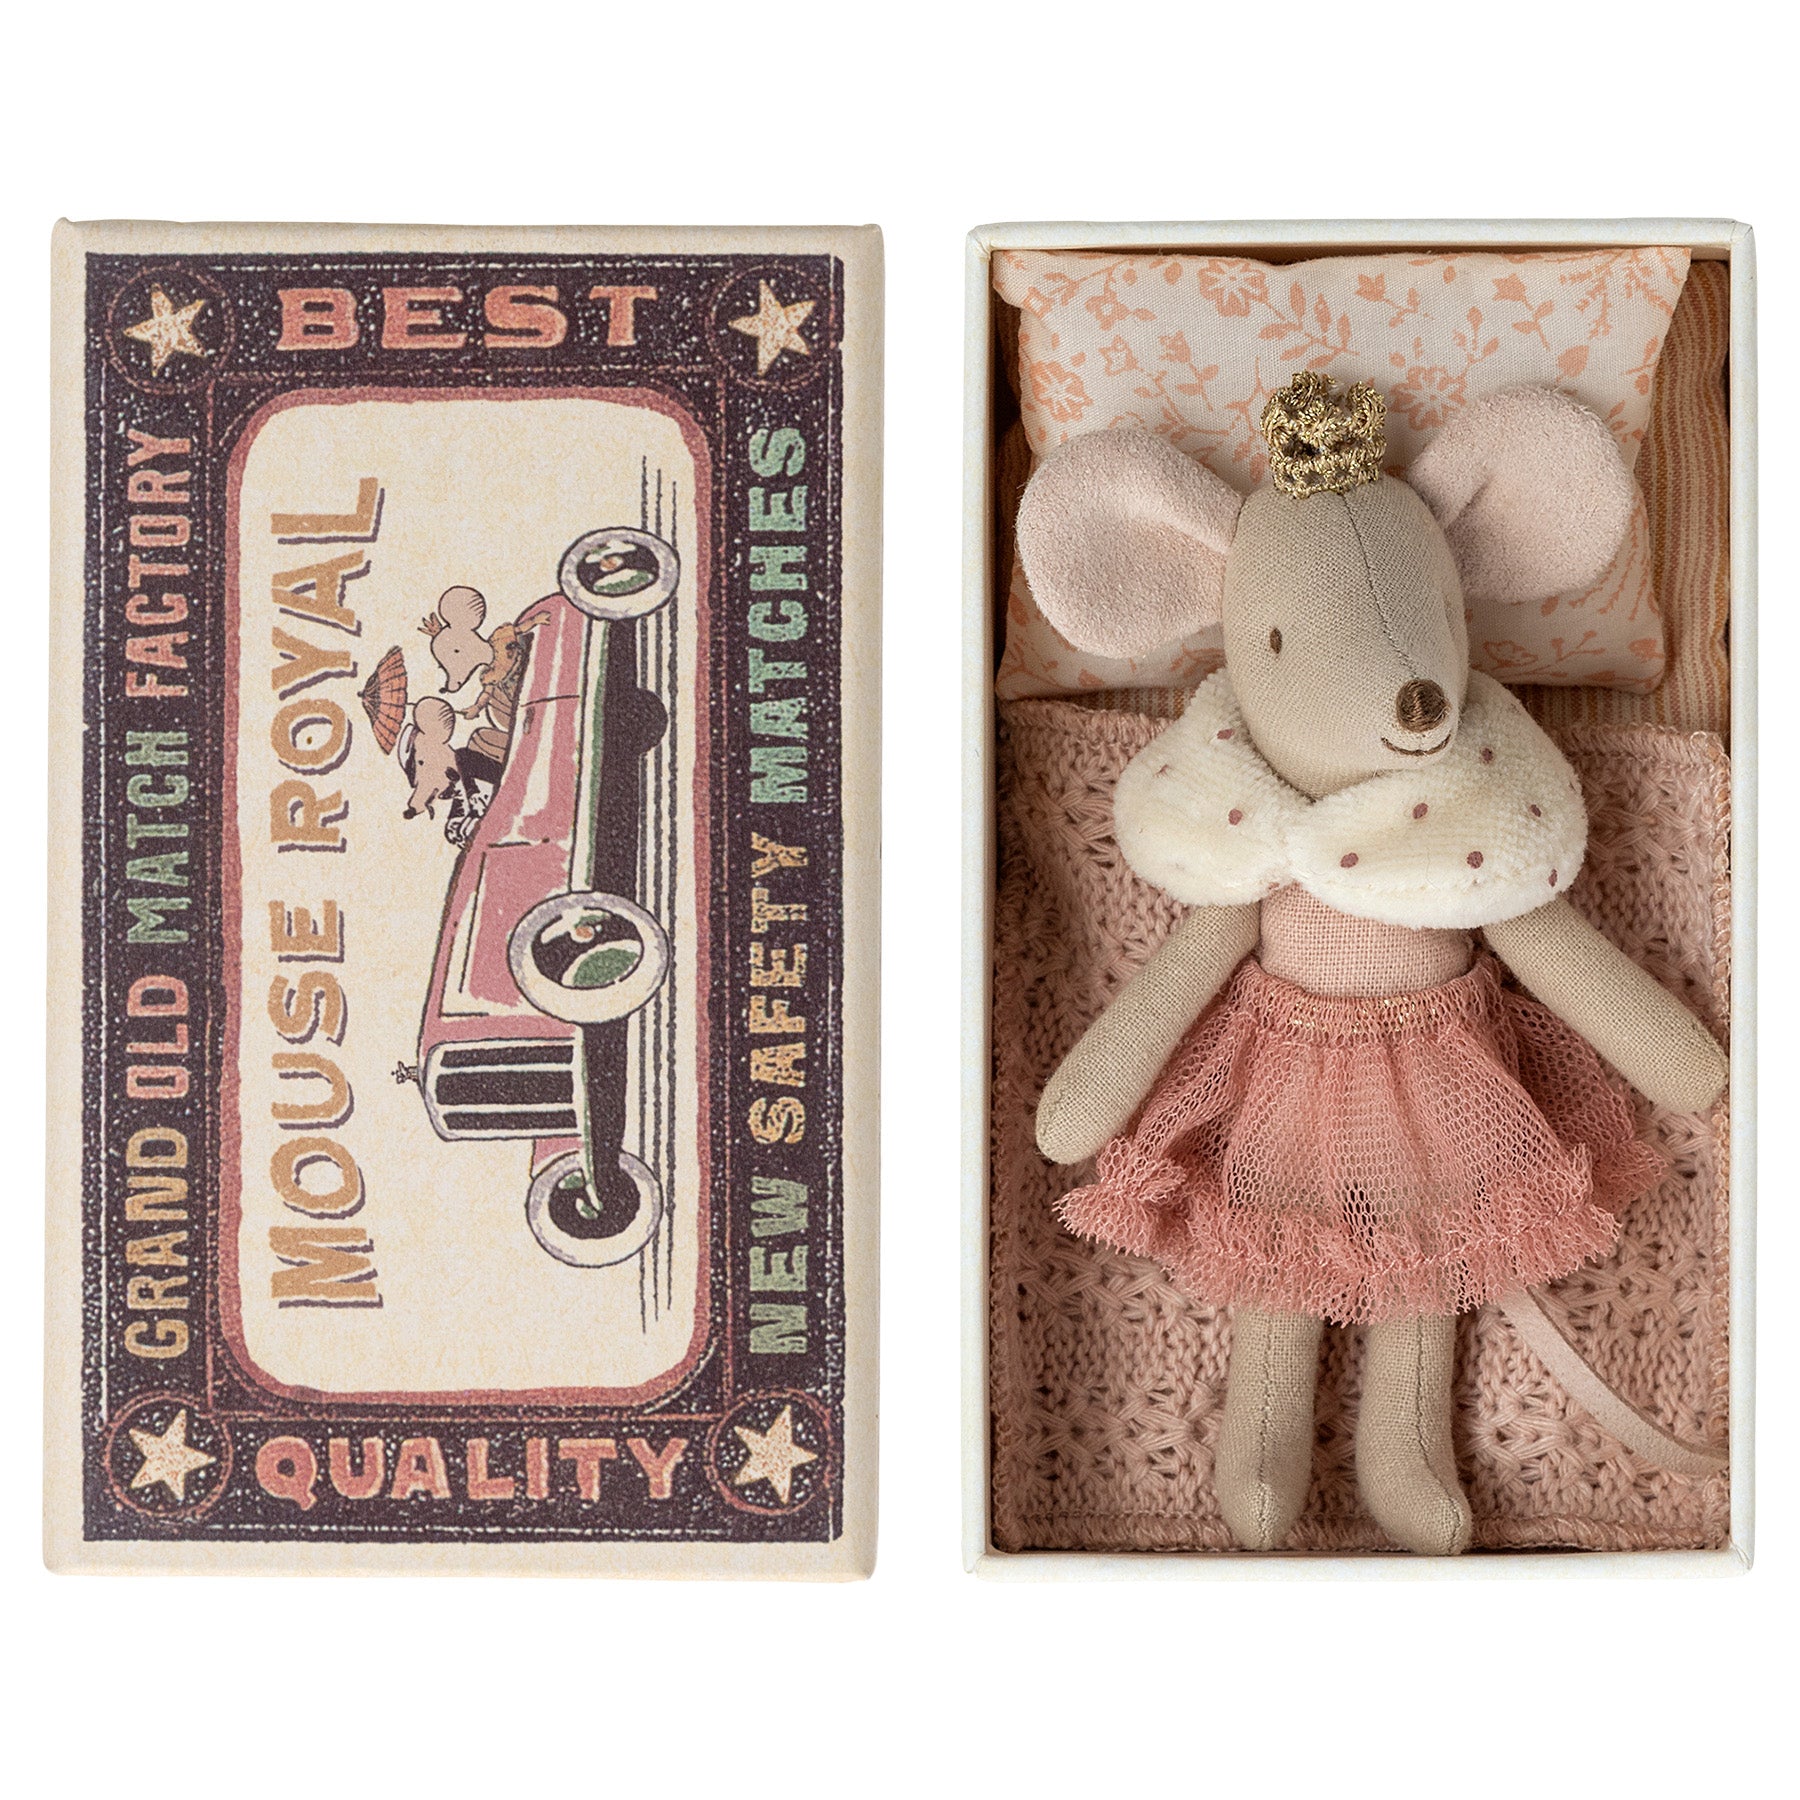 Maileg Little Sister Princess Mouse in a Matchbox - Royal Family